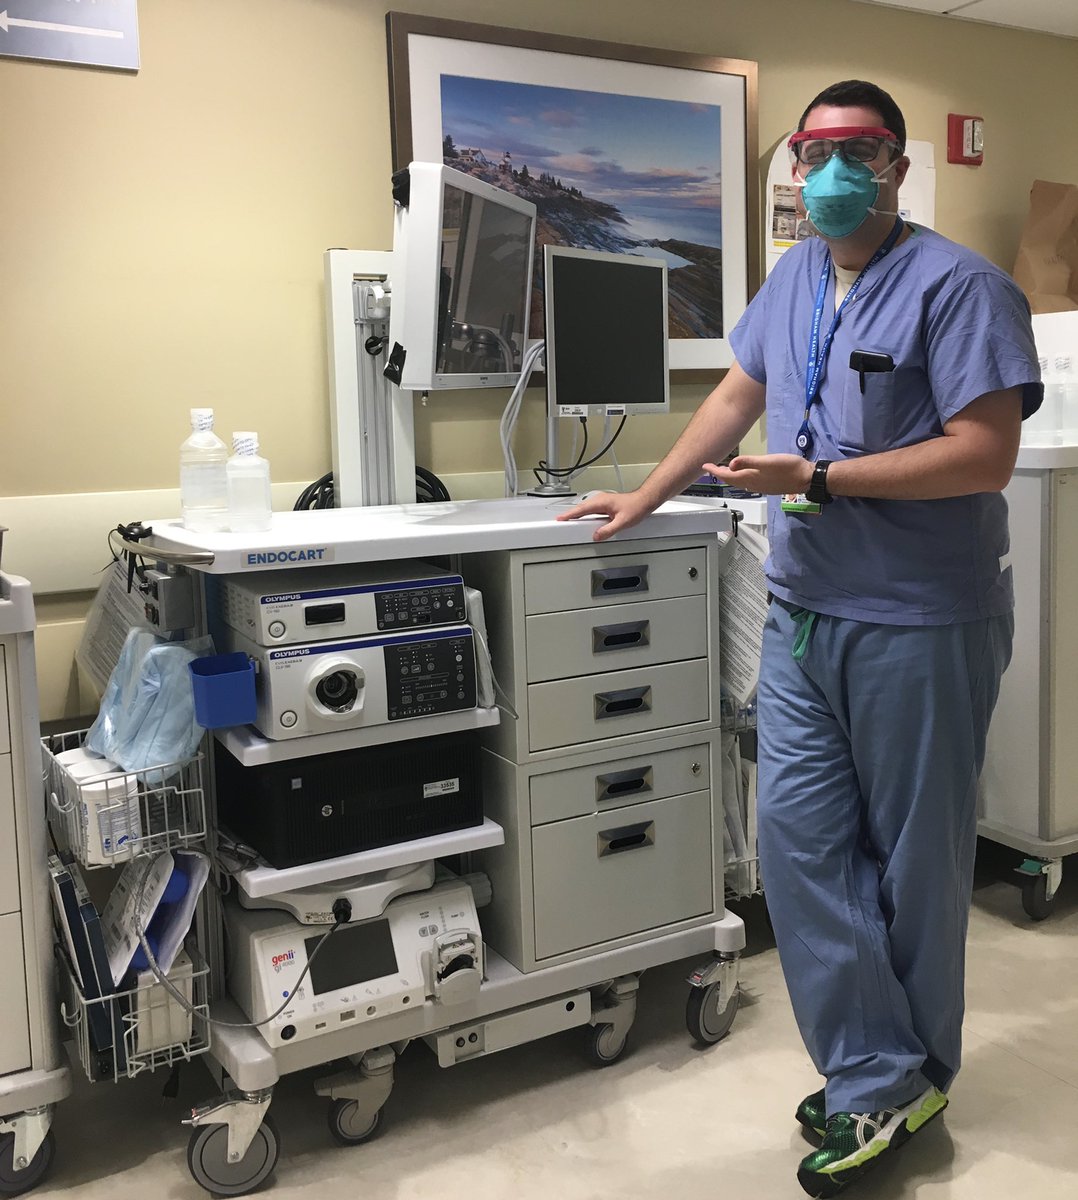 Meanwhile our 1st-yr fellow @RyanFlanaganMD is busy getting “The Cart” ready to deliver a travel #endoscopy case to the ICU on the inpatient GI consult service. #UberScopes

#BrighamGIFellows #GIConsult #Pursueyourpassion #Makethedaycount #FutureofGI